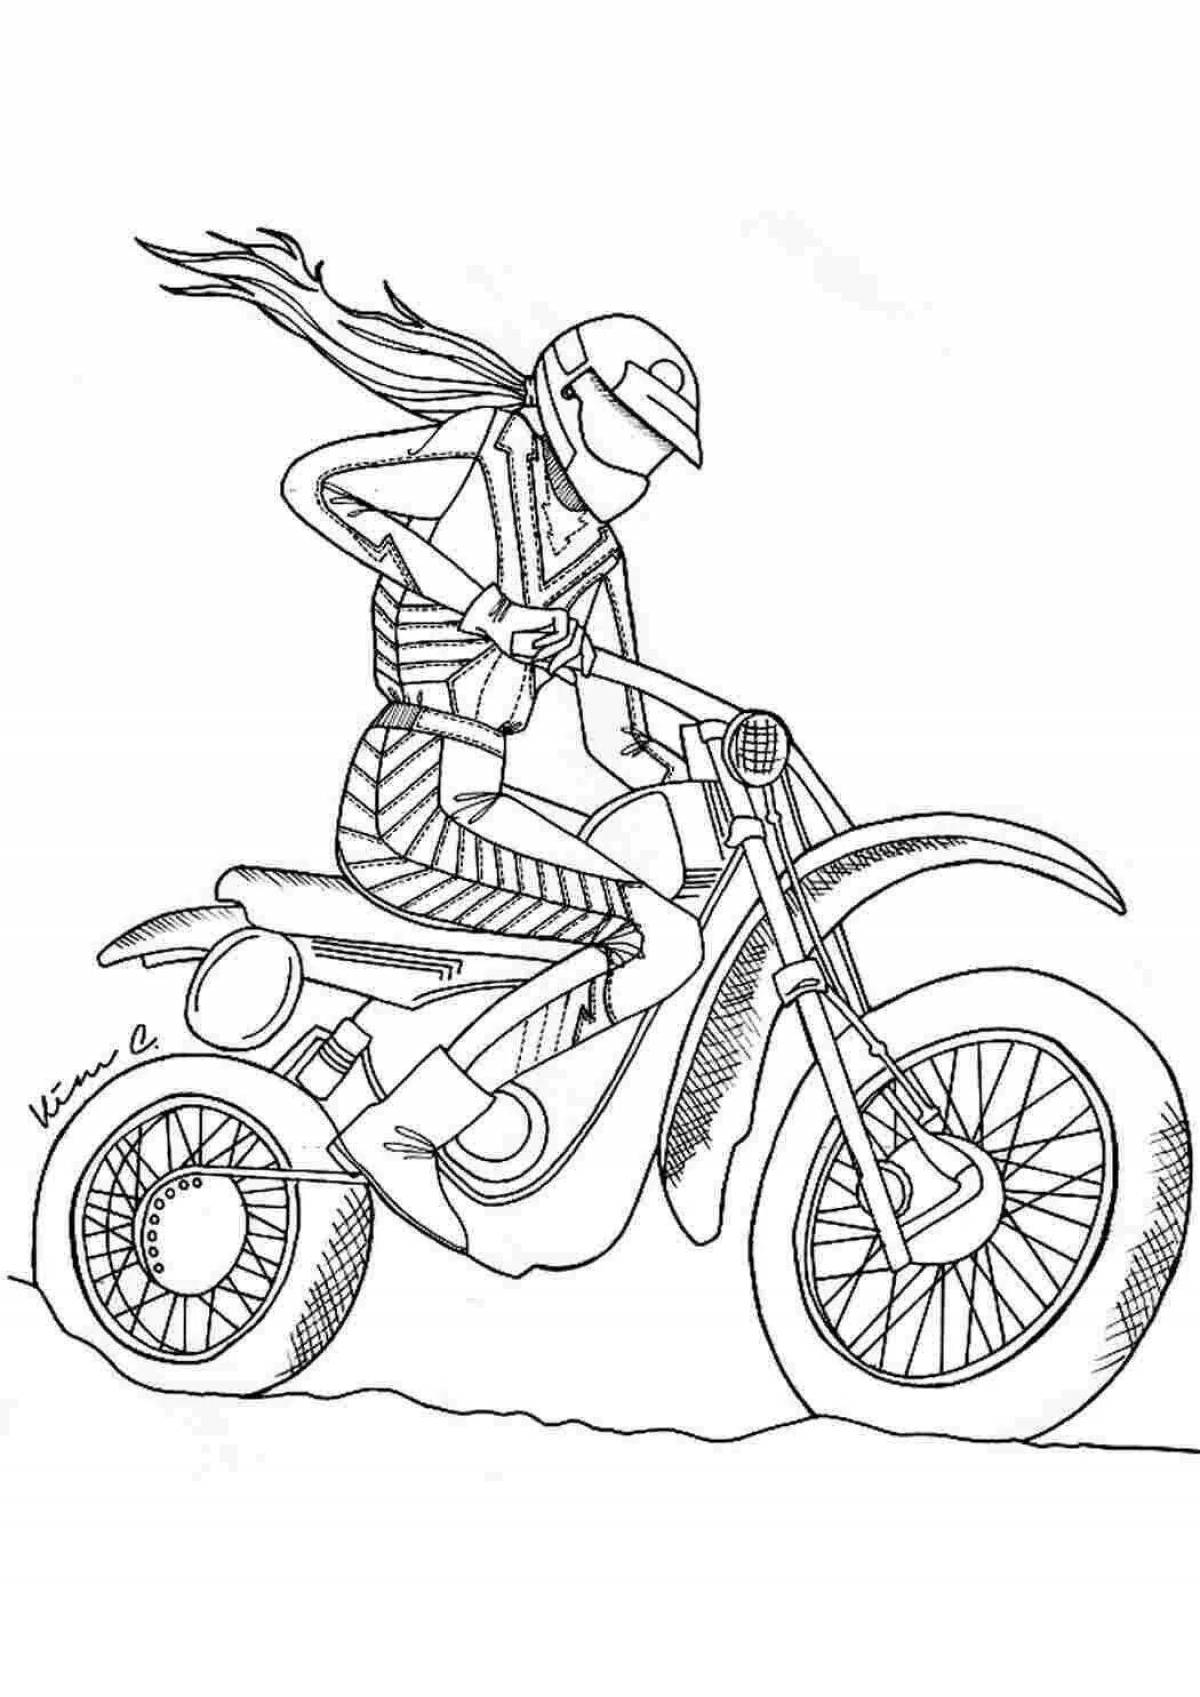 Motocross live coloring page